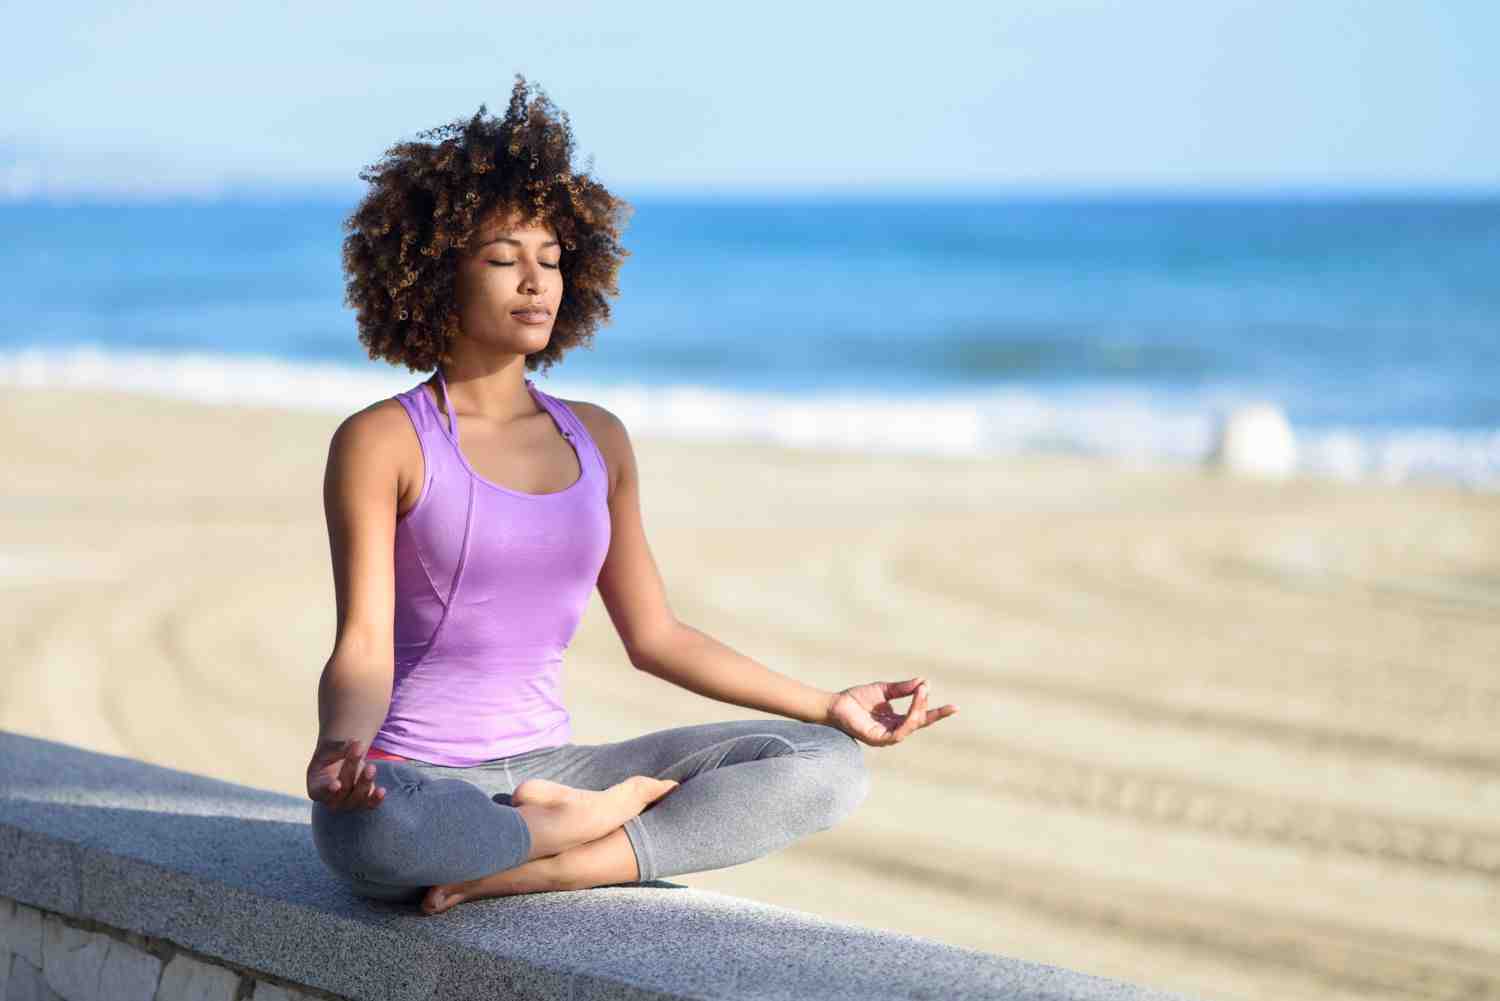 Seeking zen? Discover the best "meditation classes near me" with our top-picked local classes and online sanctuaries. Find inner peace, one breath at a time!